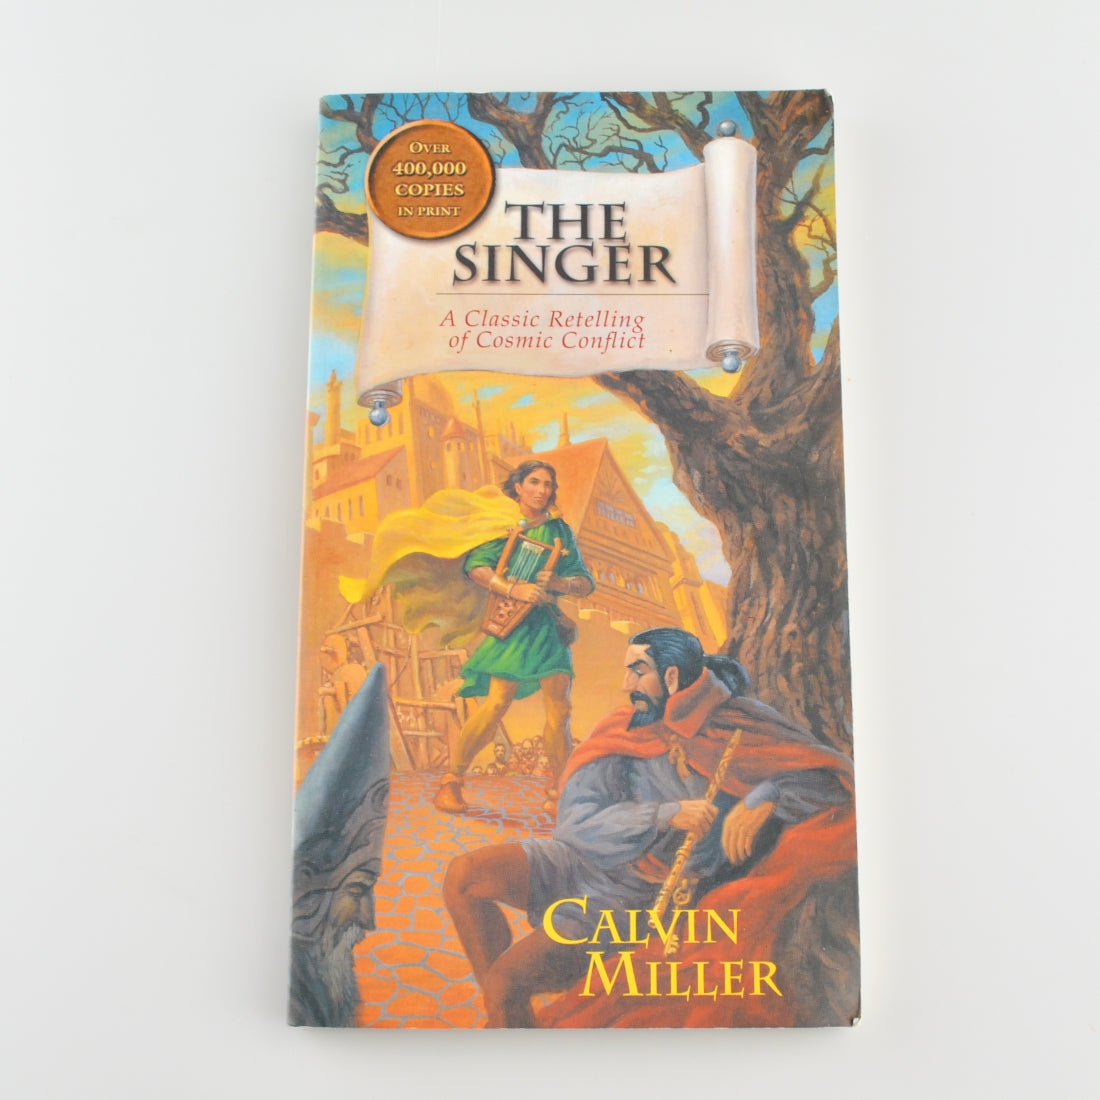 The Singer by Calvin Miller - A Classic Retelling of Cosmic Conflict